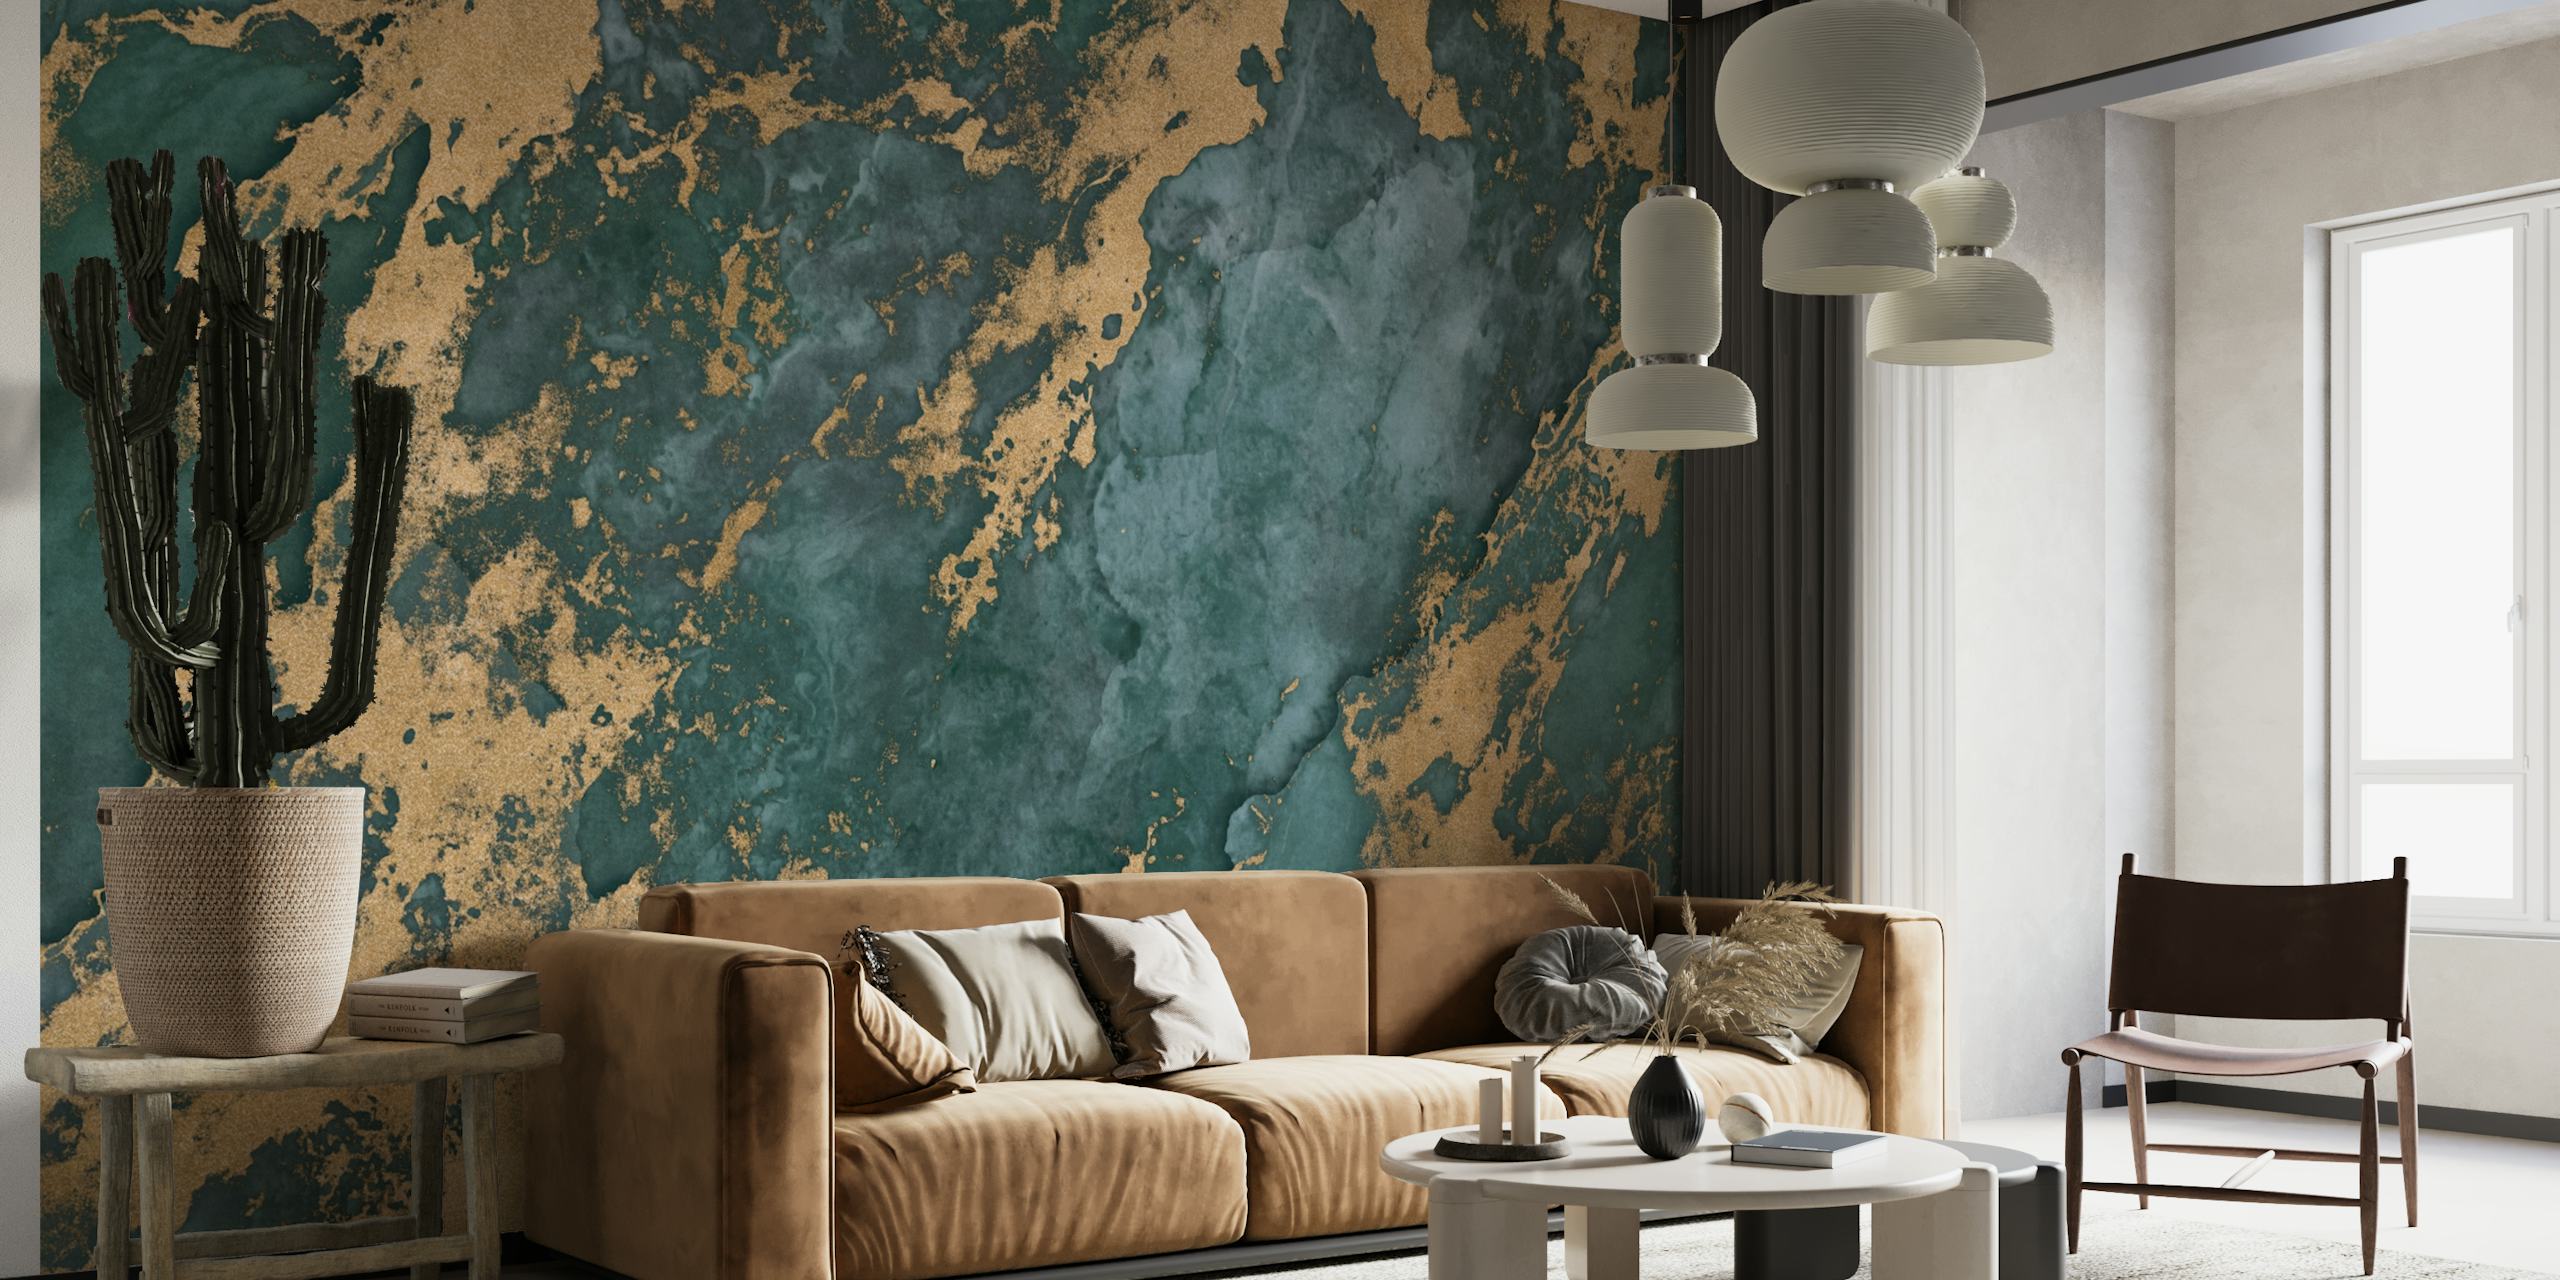 Mineral Marble Texture Teal Gold wallpaper